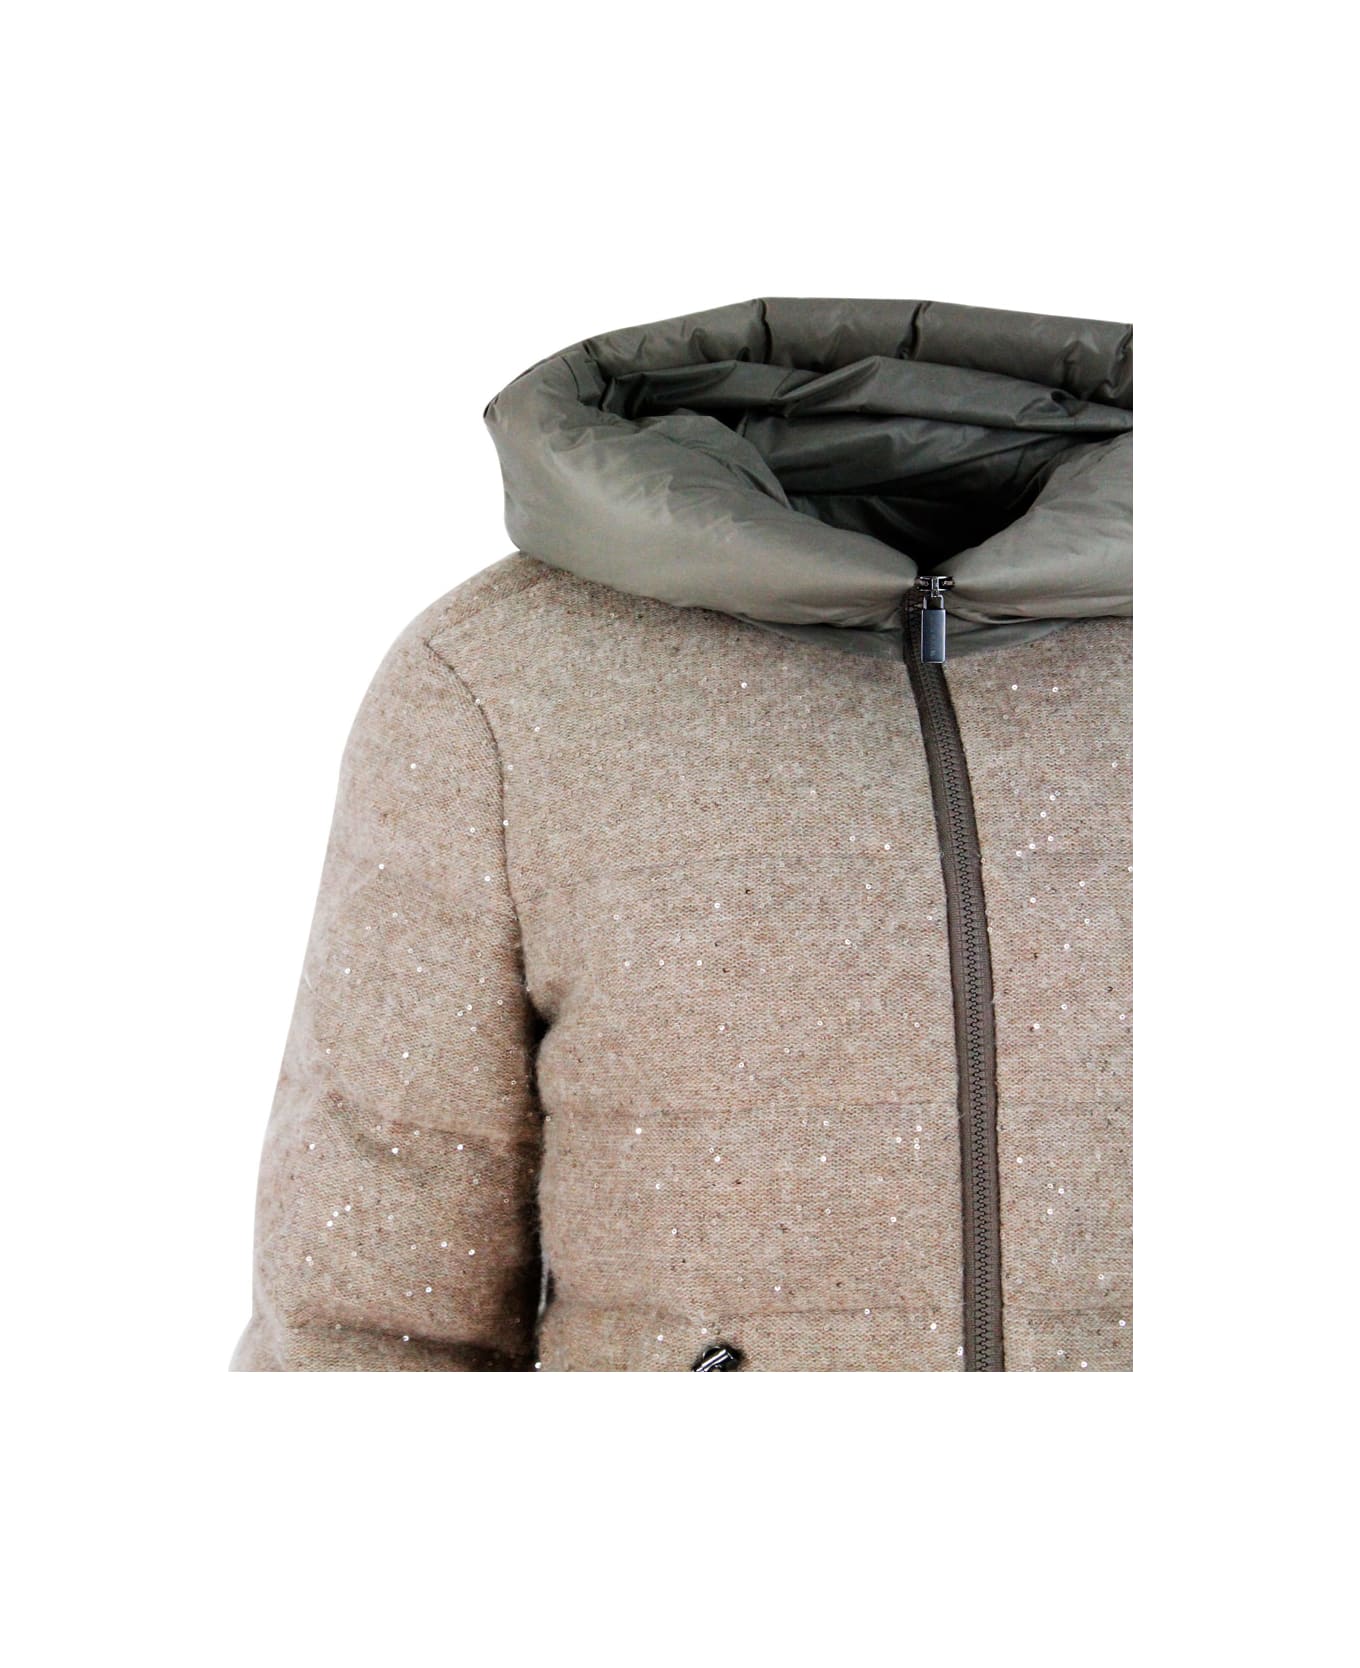 Fabiana Filippi Down Jacket Padded With Real Goose Down Made Of Soft And Precious Wool, Silk And Cashmere With Drawstring At The Waist And Hood In Technical Fabric - Nut